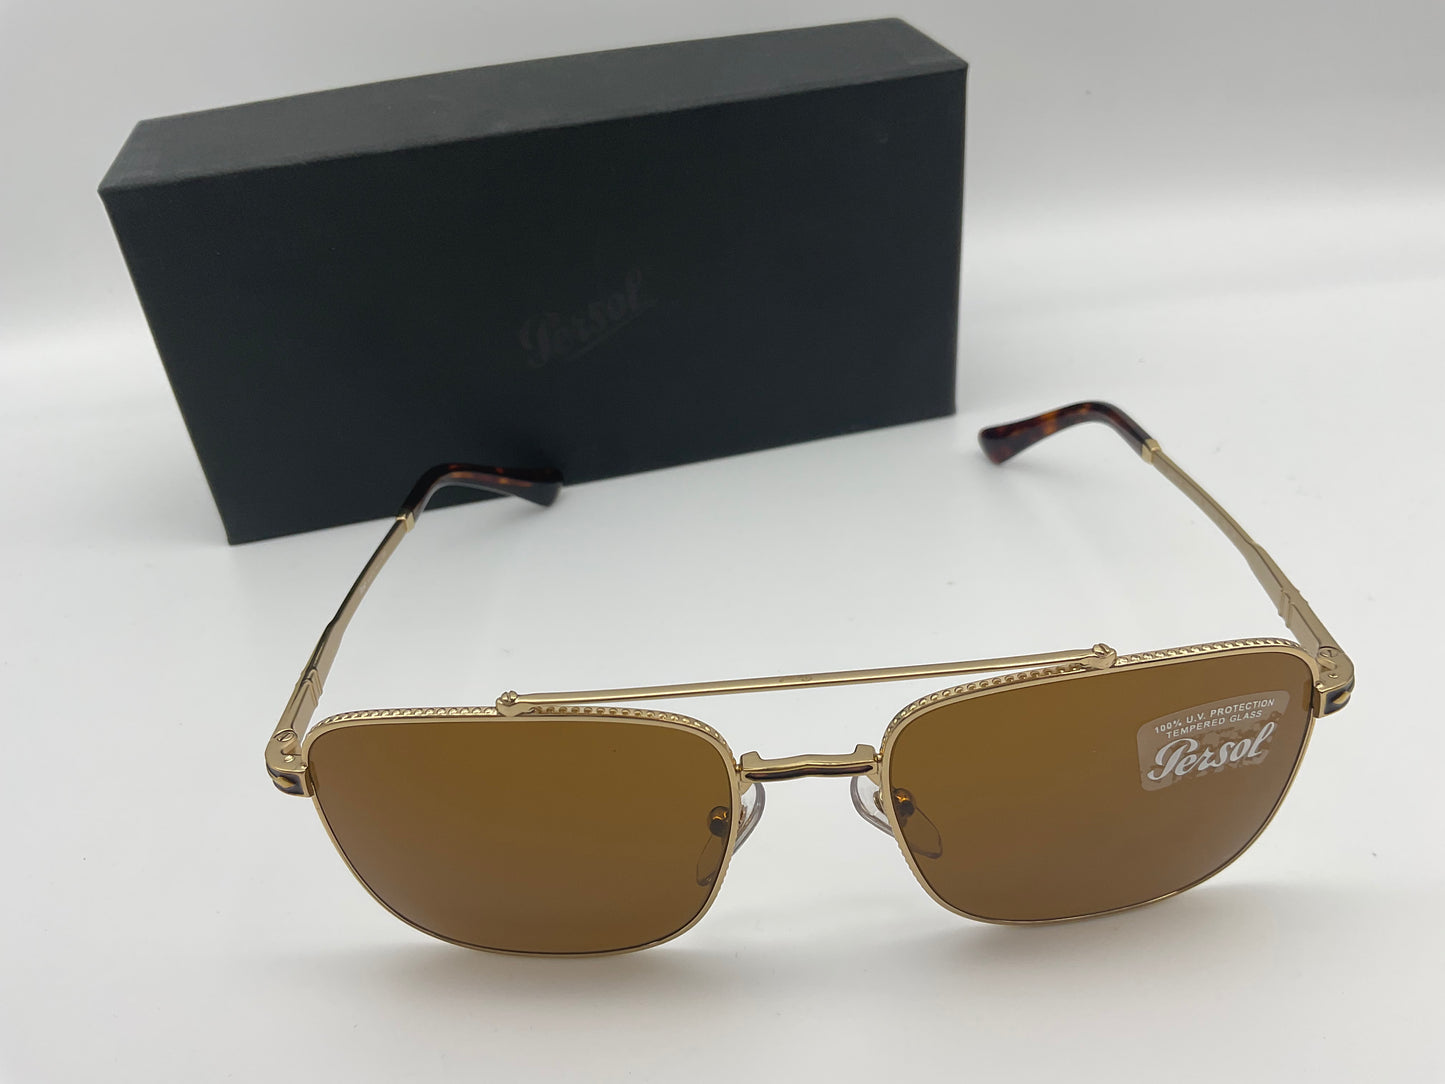 Persol PO 2487s 55mm Gold/Havana Browns made in Italy